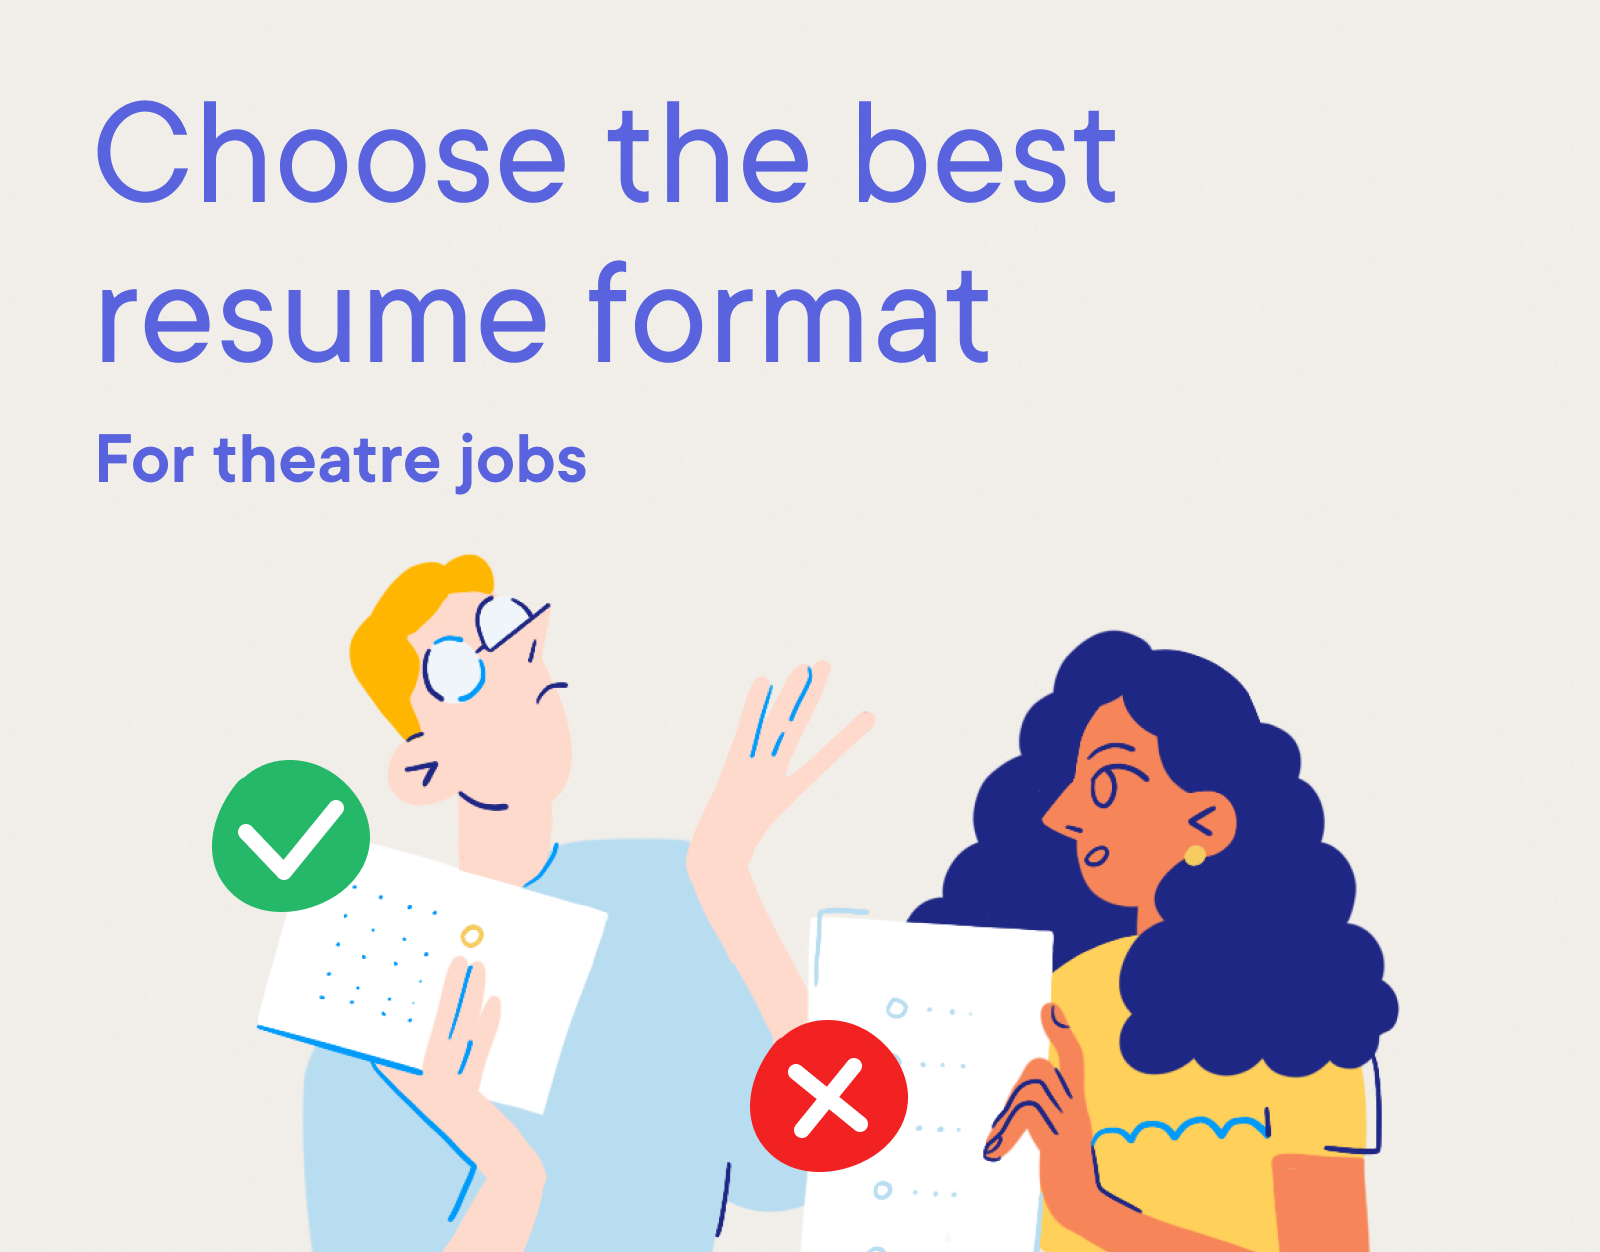 Theatre - Choose the best resume format